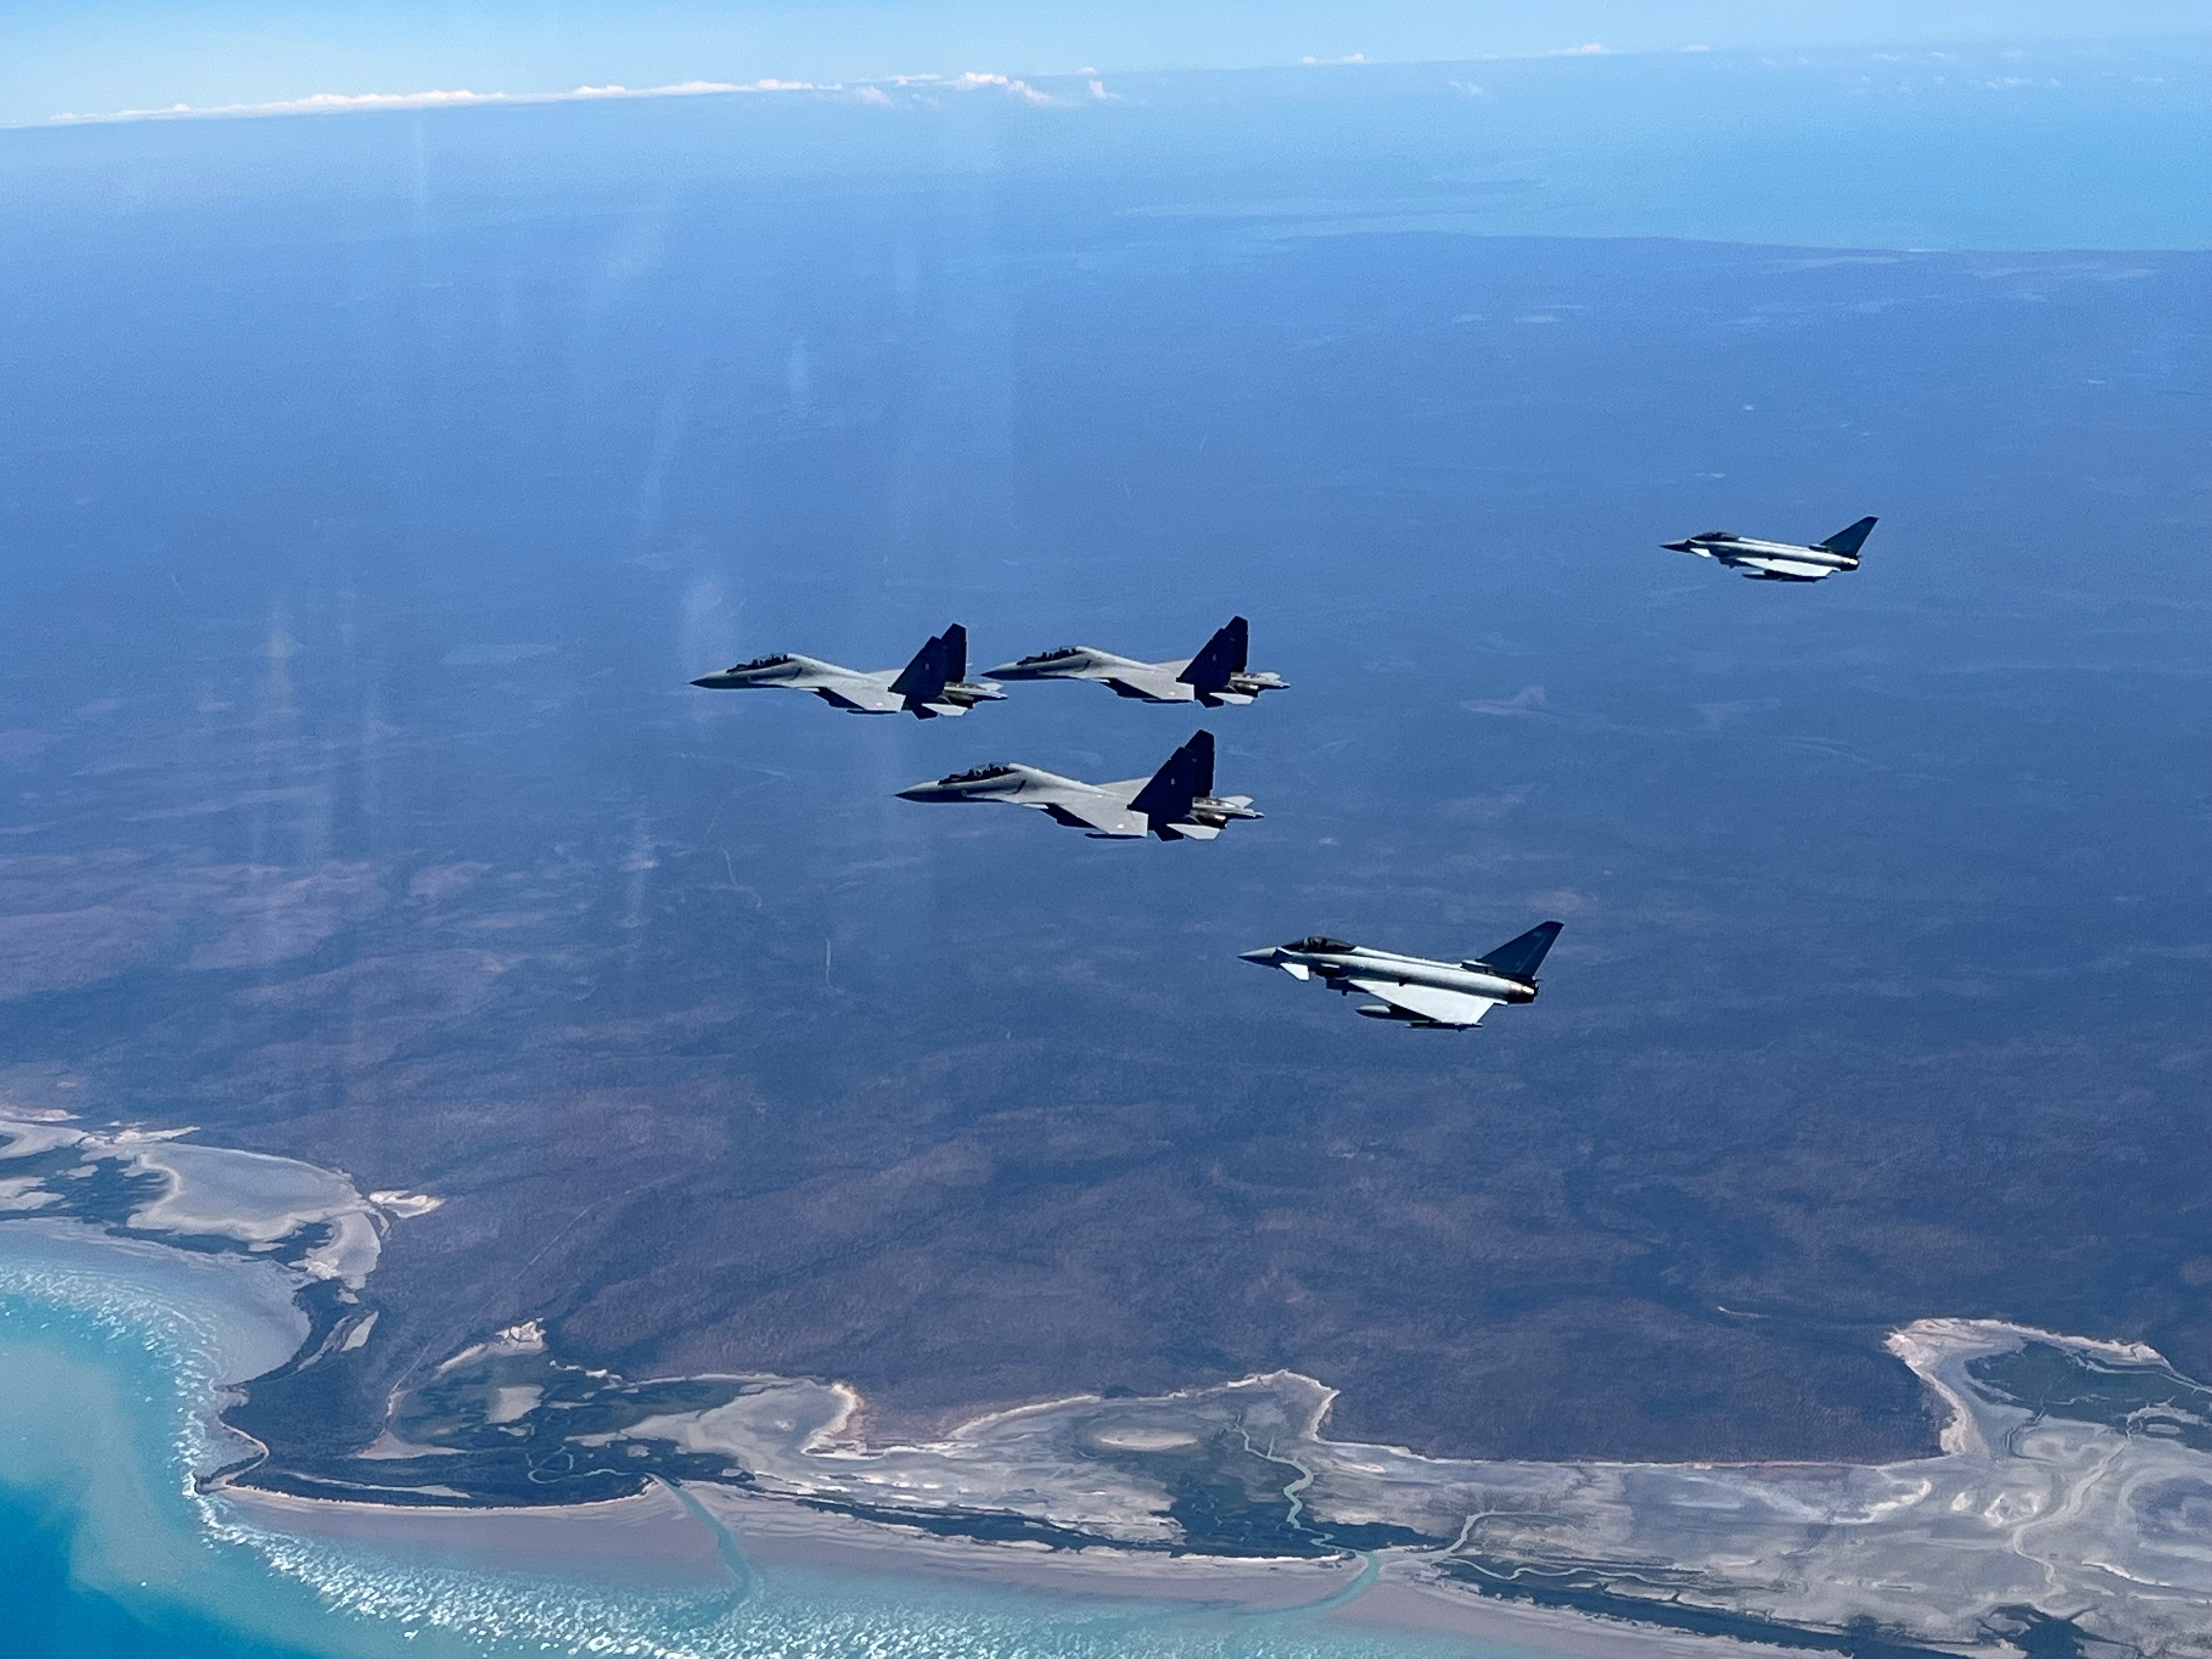 Image shows RAF Typhoons in formation as they fly.